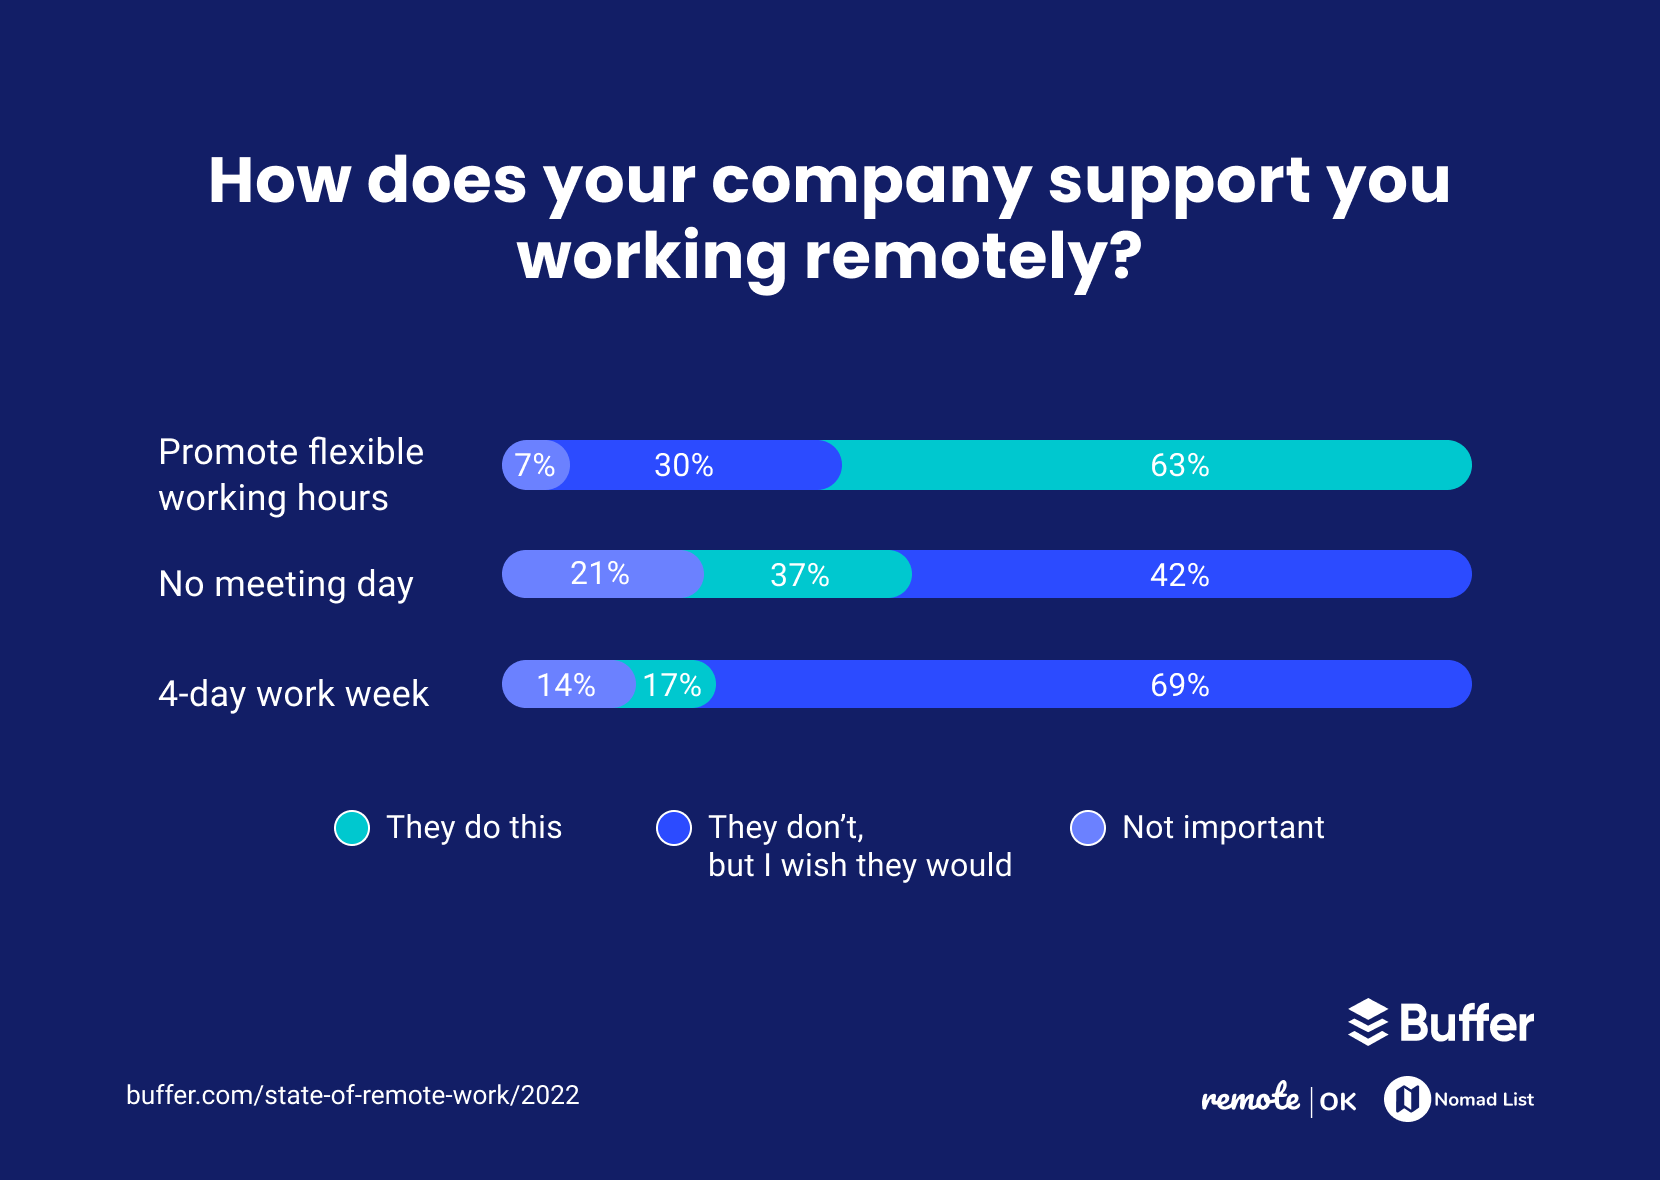 How does your company support working remotely?